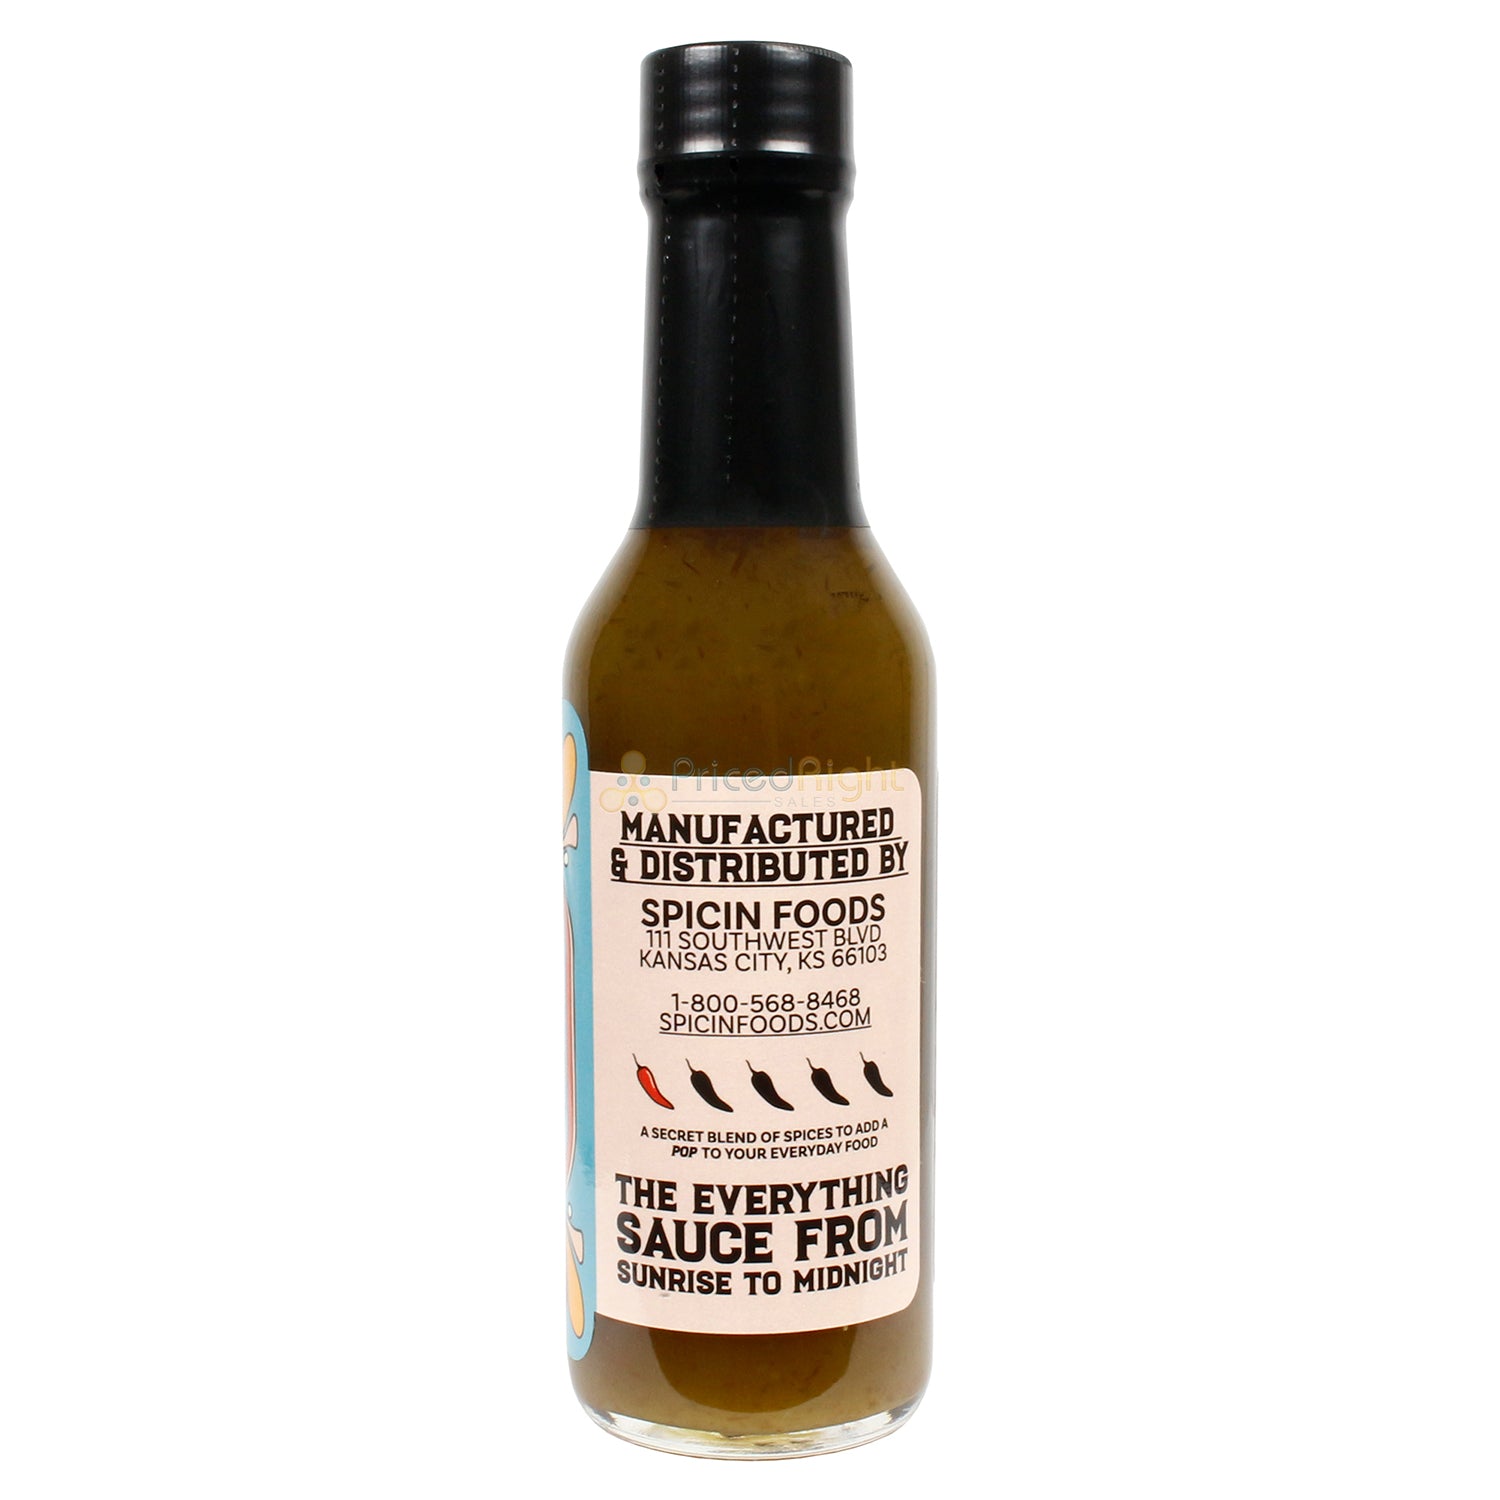 Paco Francisco Sweet Pepper Sauce All Purpose Mild Hot Sauce Made in USA 6 Ounce